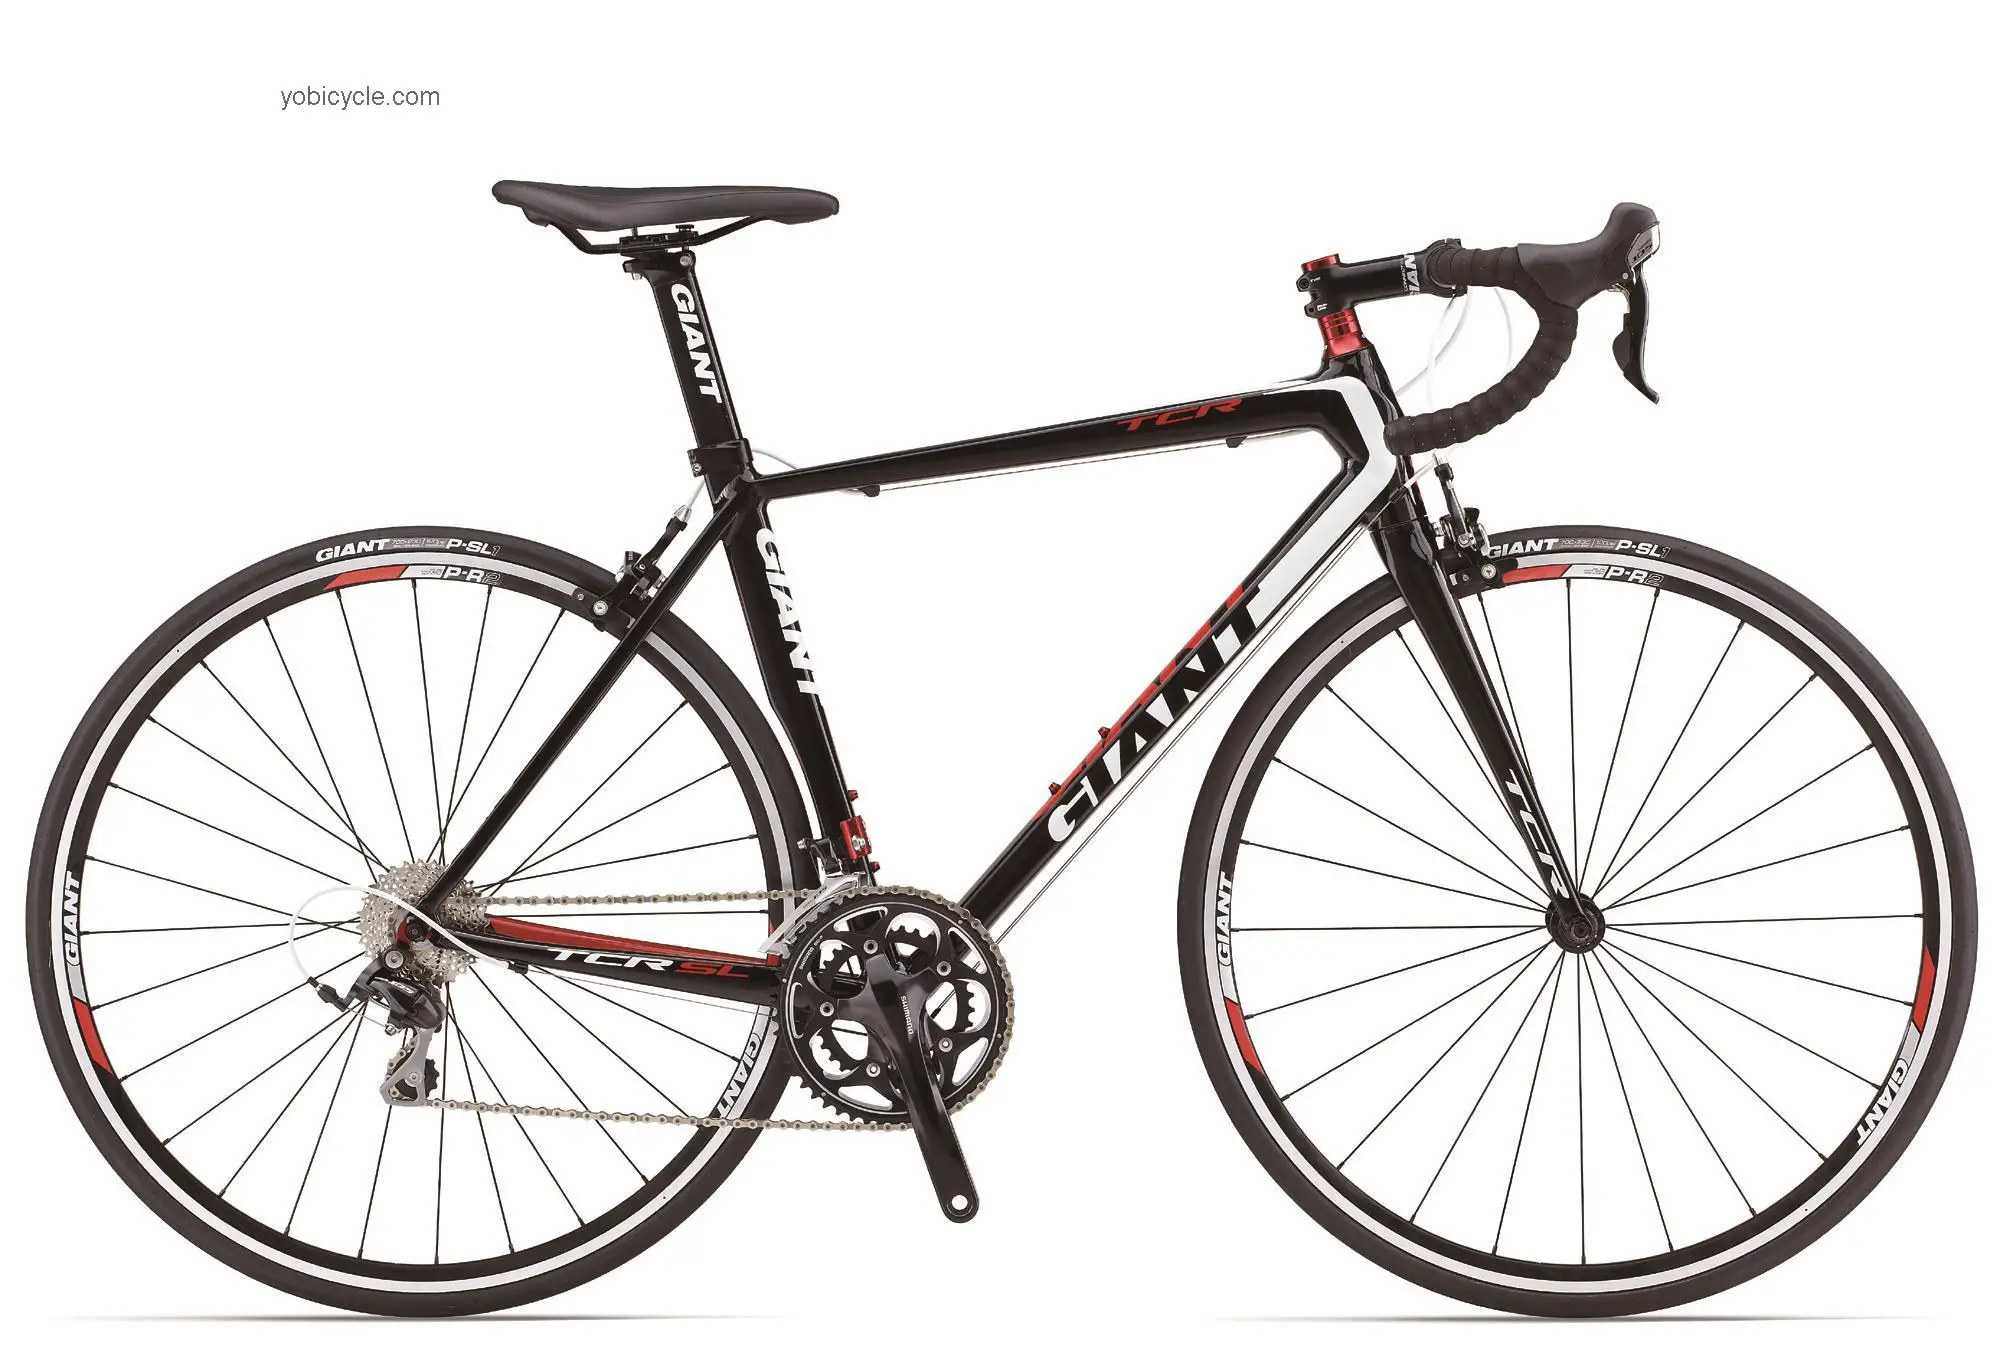 Giant TCR SL 2 2013 comparison online with competitors